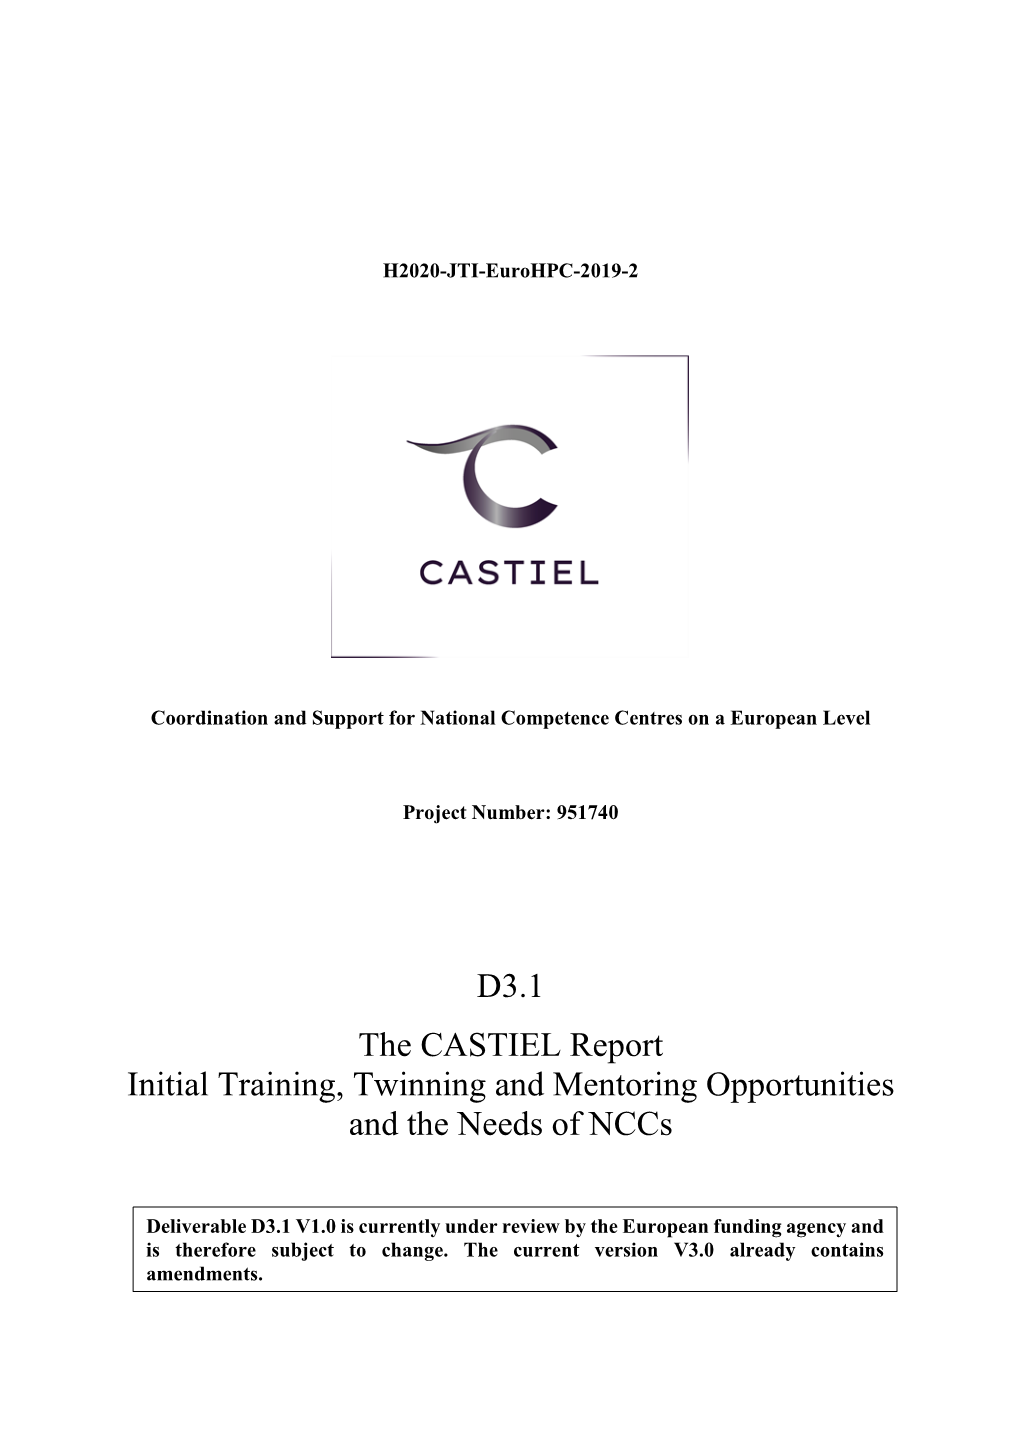 D3.1 the CASTIEL Report Initial Training, Twinning and Mentoring